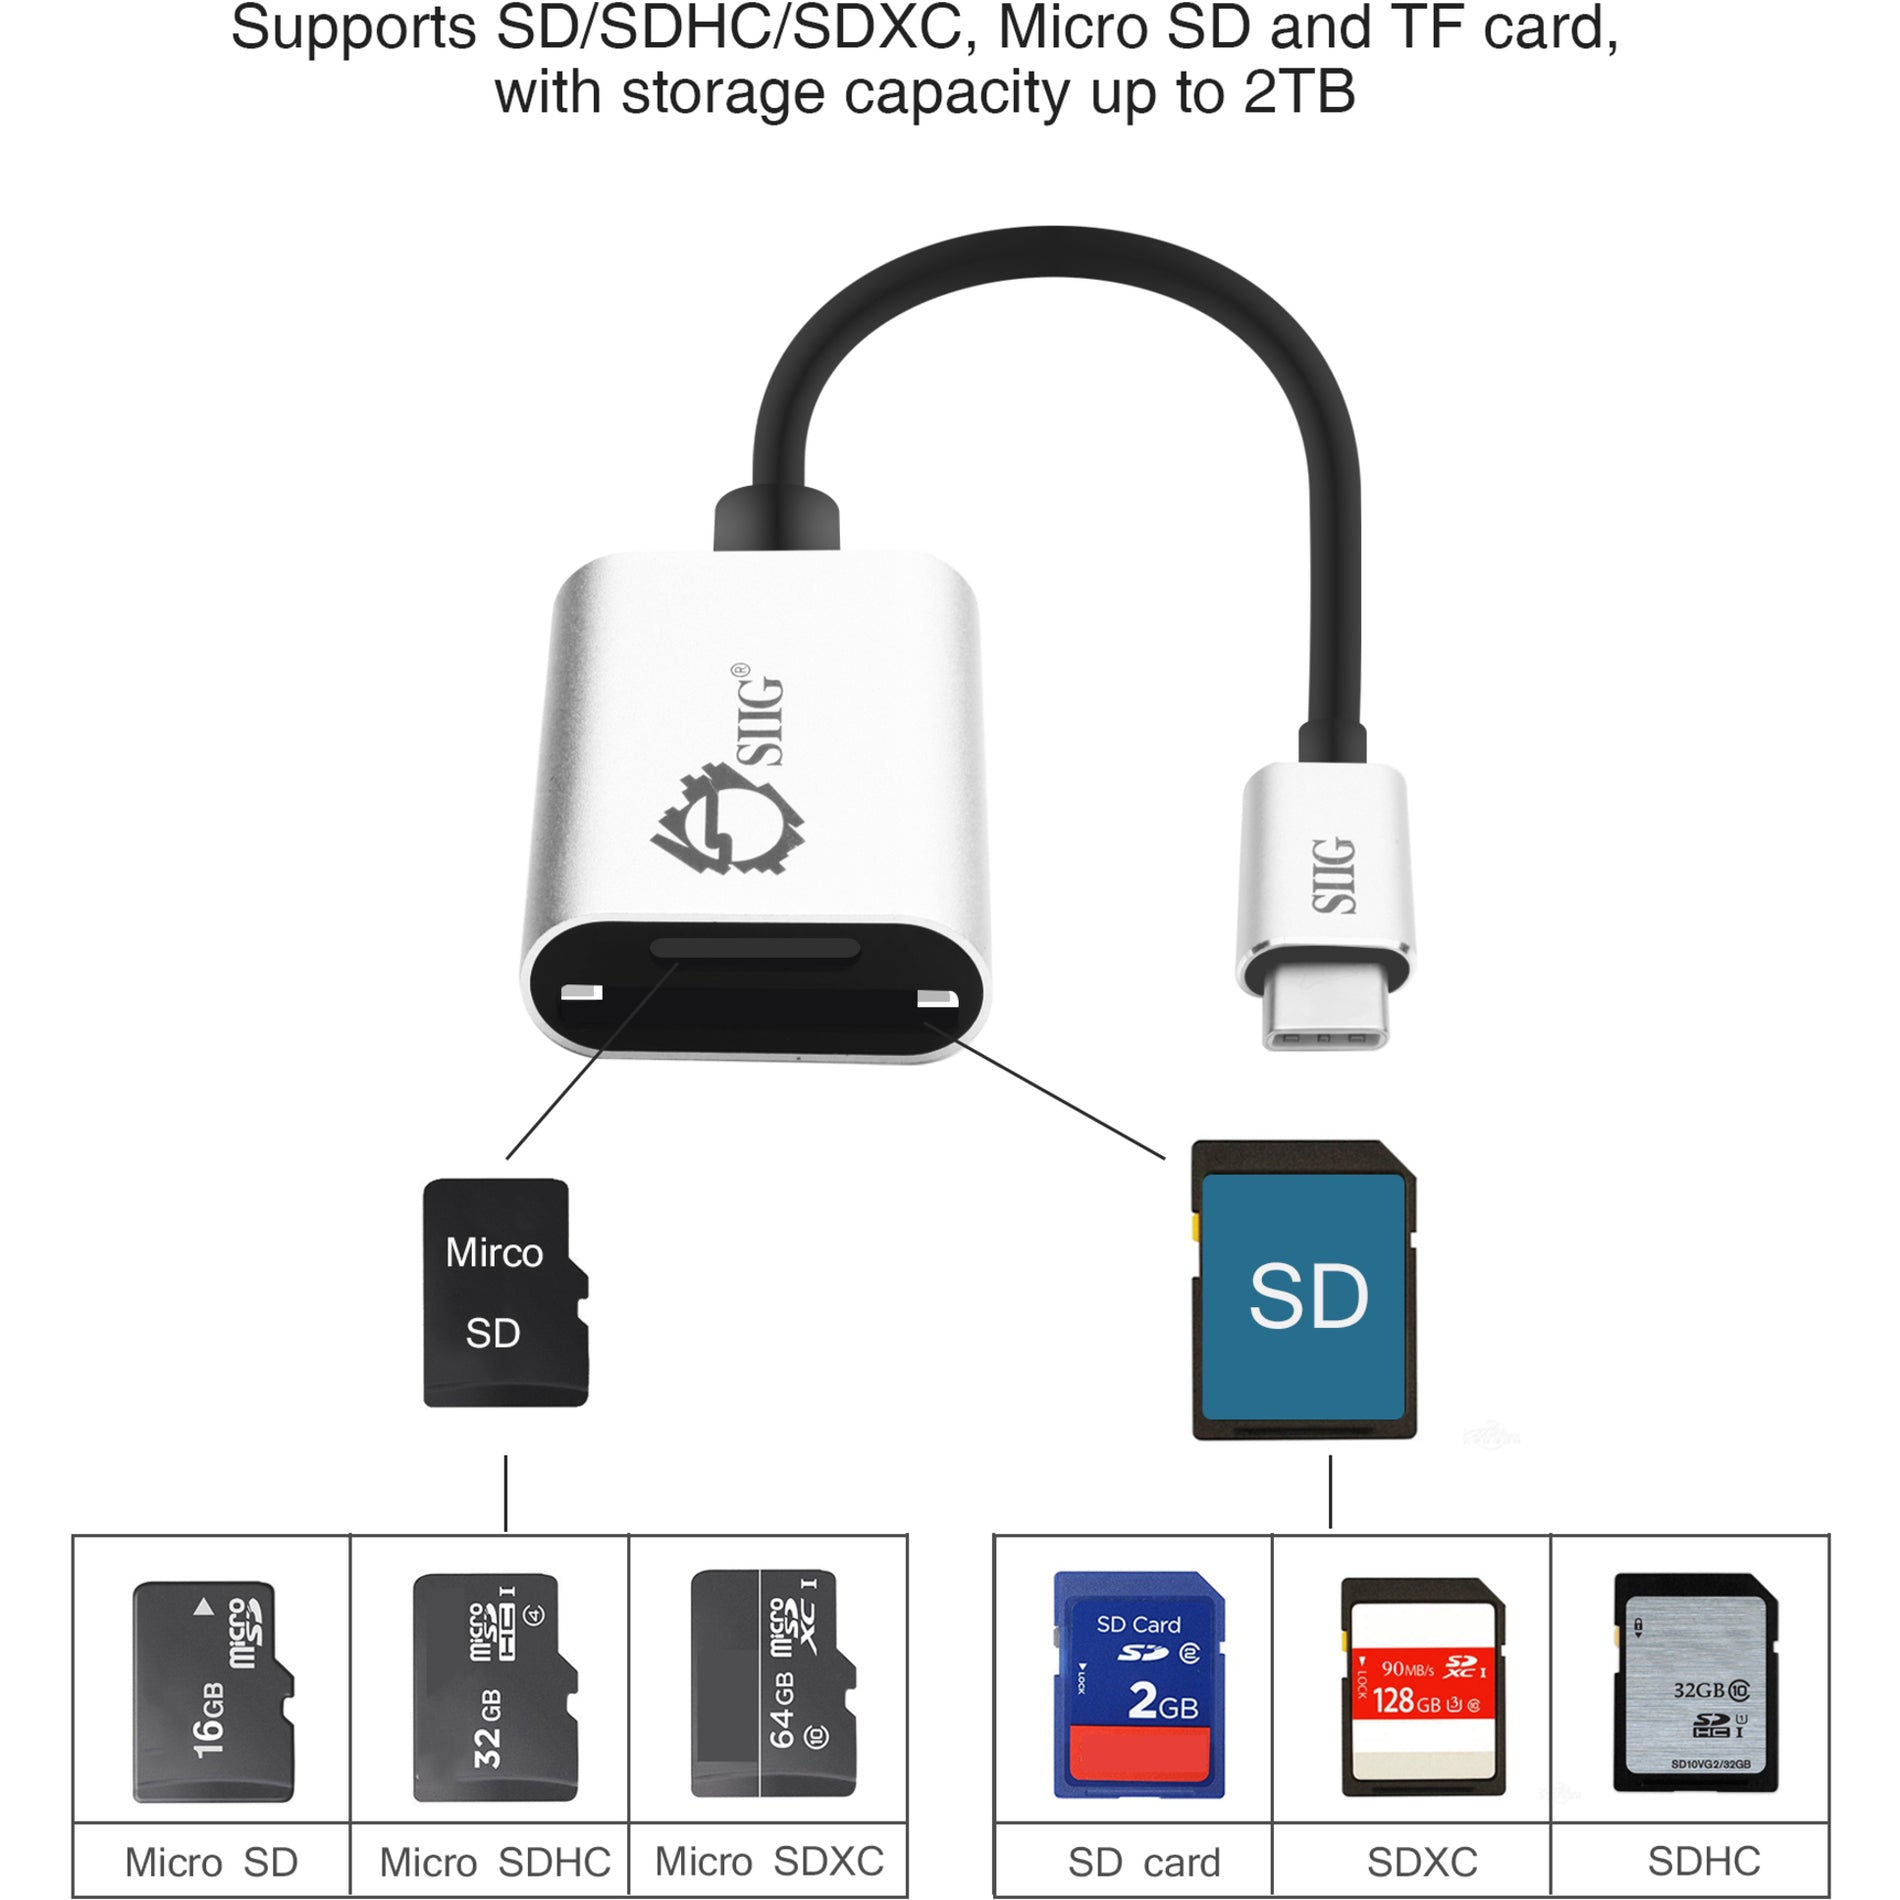 SIIG JU-MR0F12-S1 USB-C 2-in-1 Card Reader for SD & Micro SD, Silver, USB 3.0 Type C